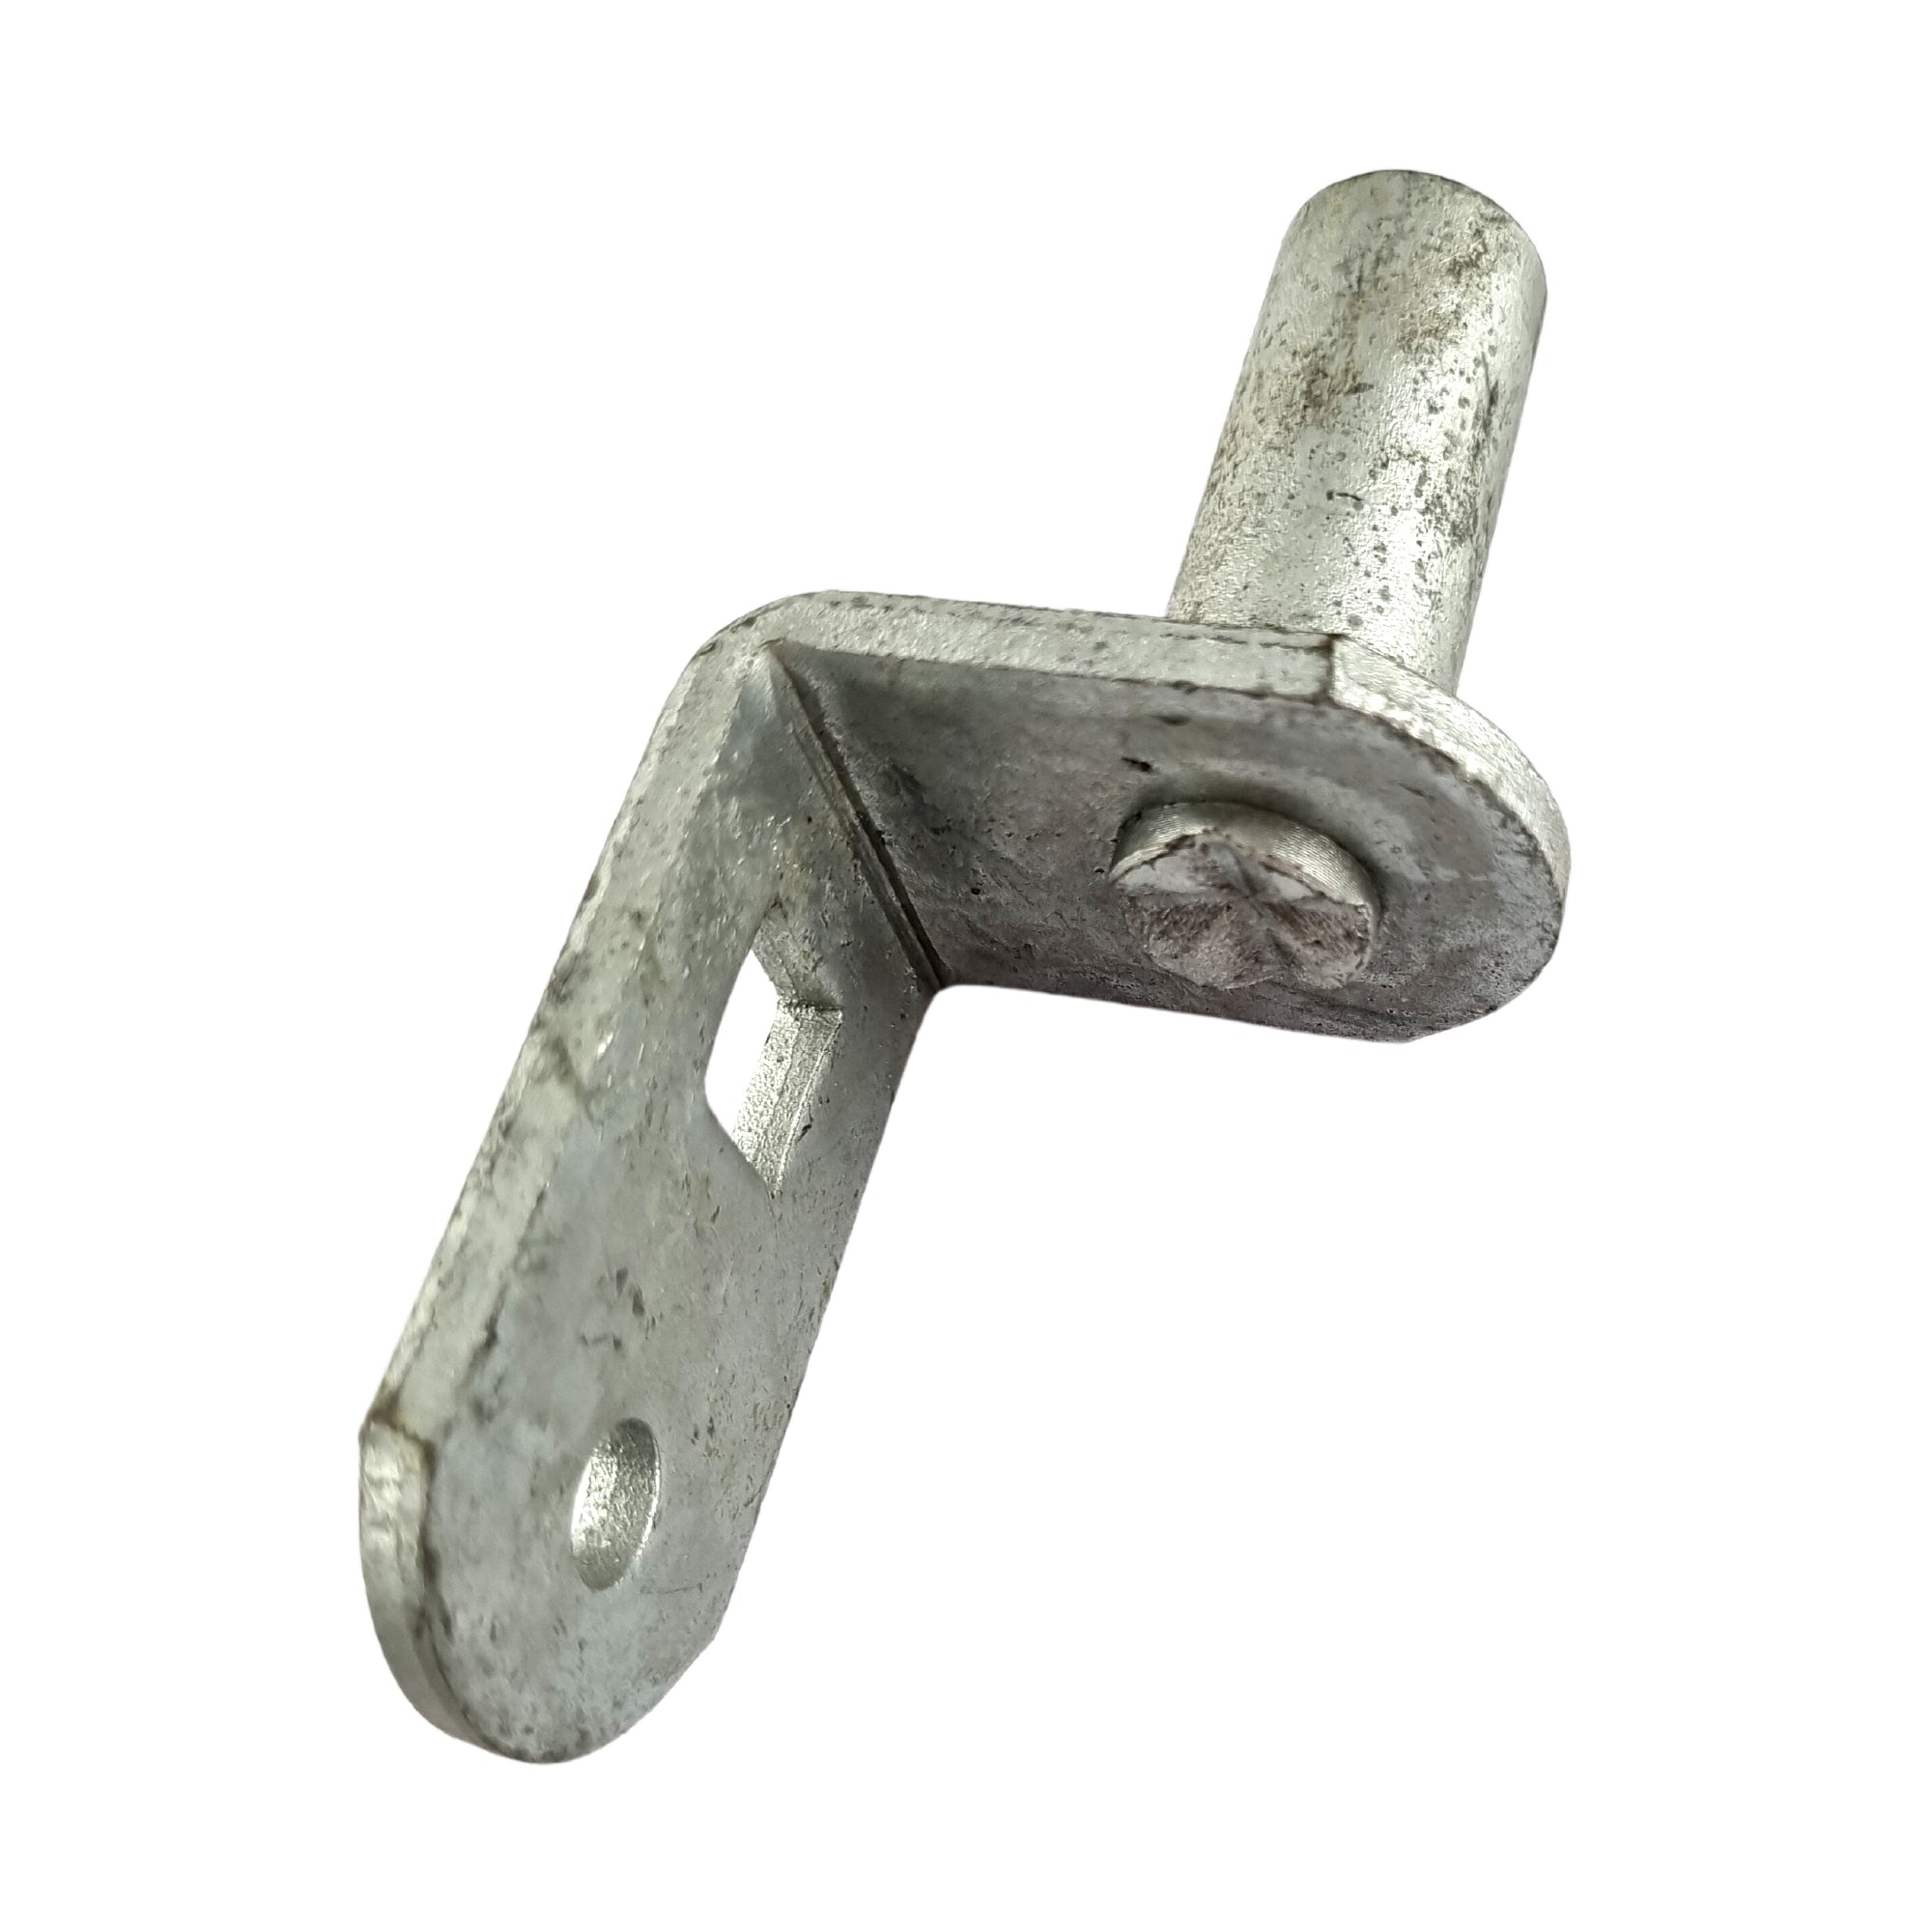 Short Plate Gudgeon - Heavy Duty - Galvanised. Australian made. Shop fence and gate fittings online. Chain.com.au. Australia wide shipping.